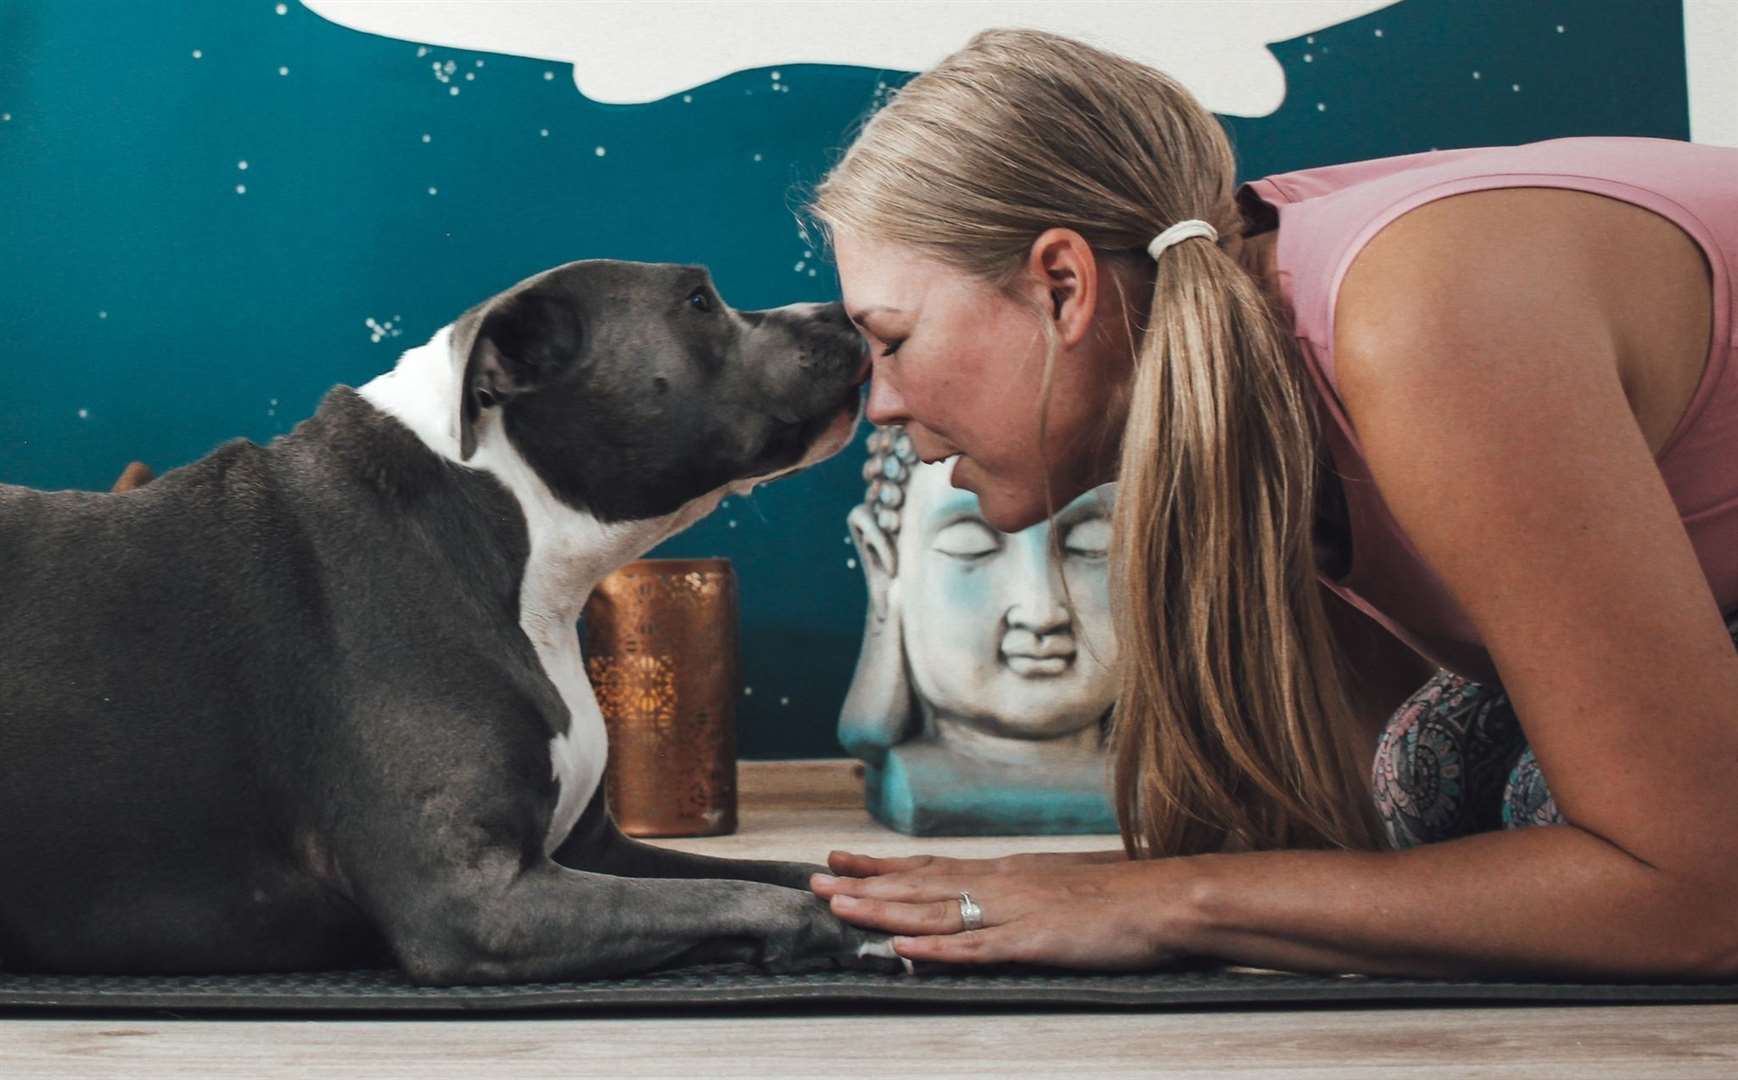 Sometimes pet pals even get involved with Tammy Foster's yoga sessions